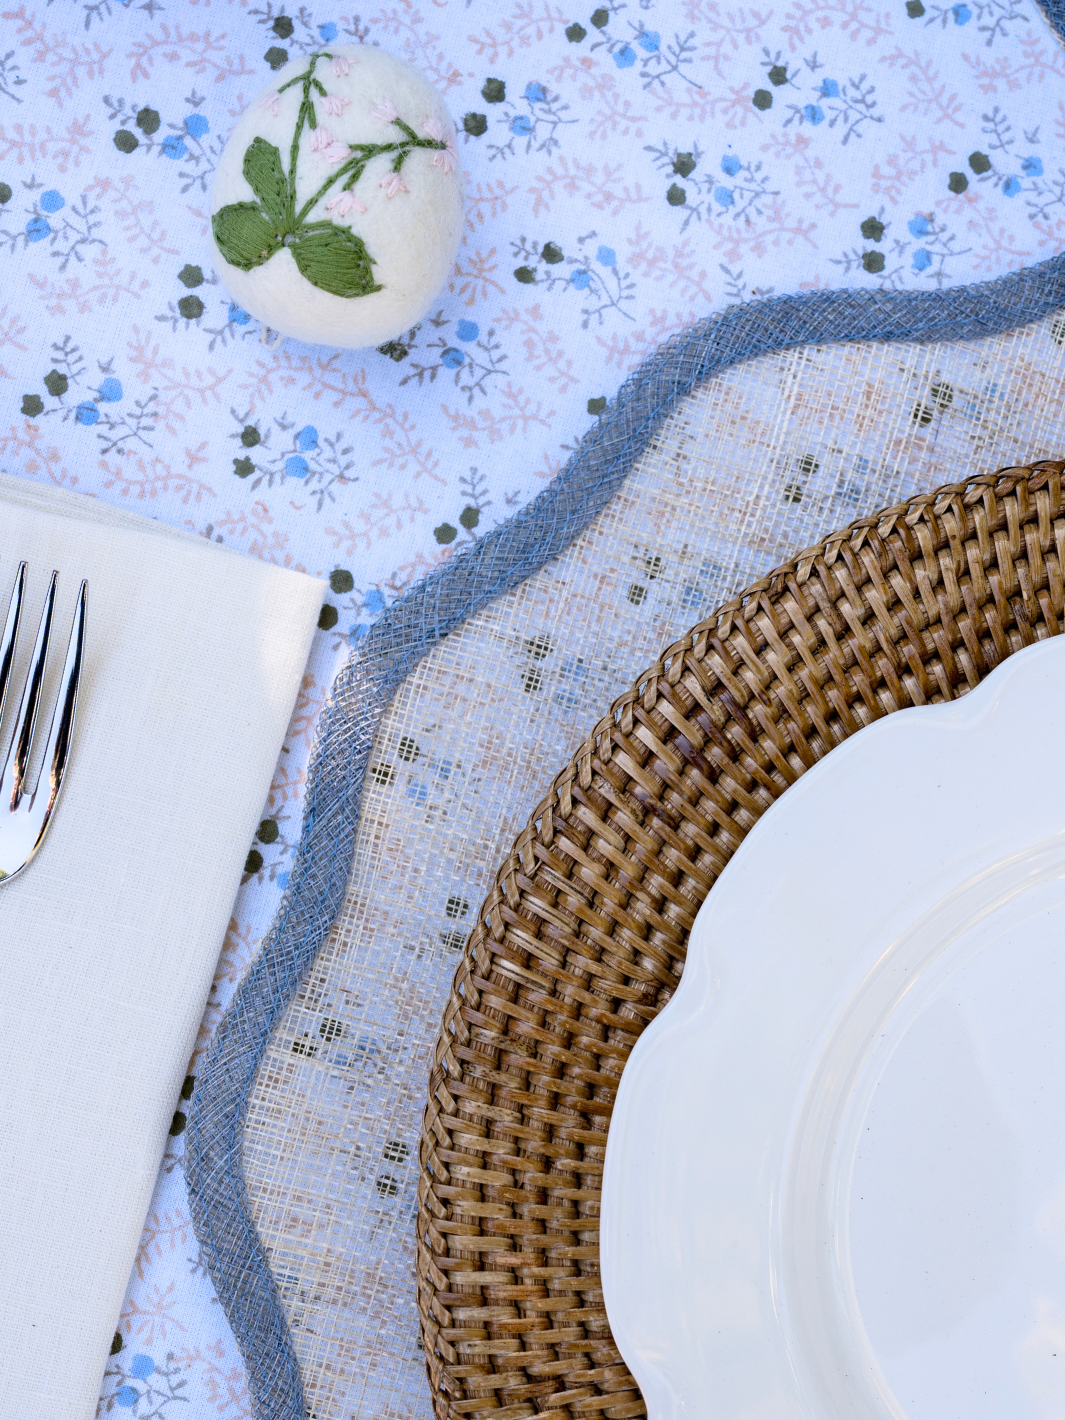 Scalloped Placemats - Pale Blue